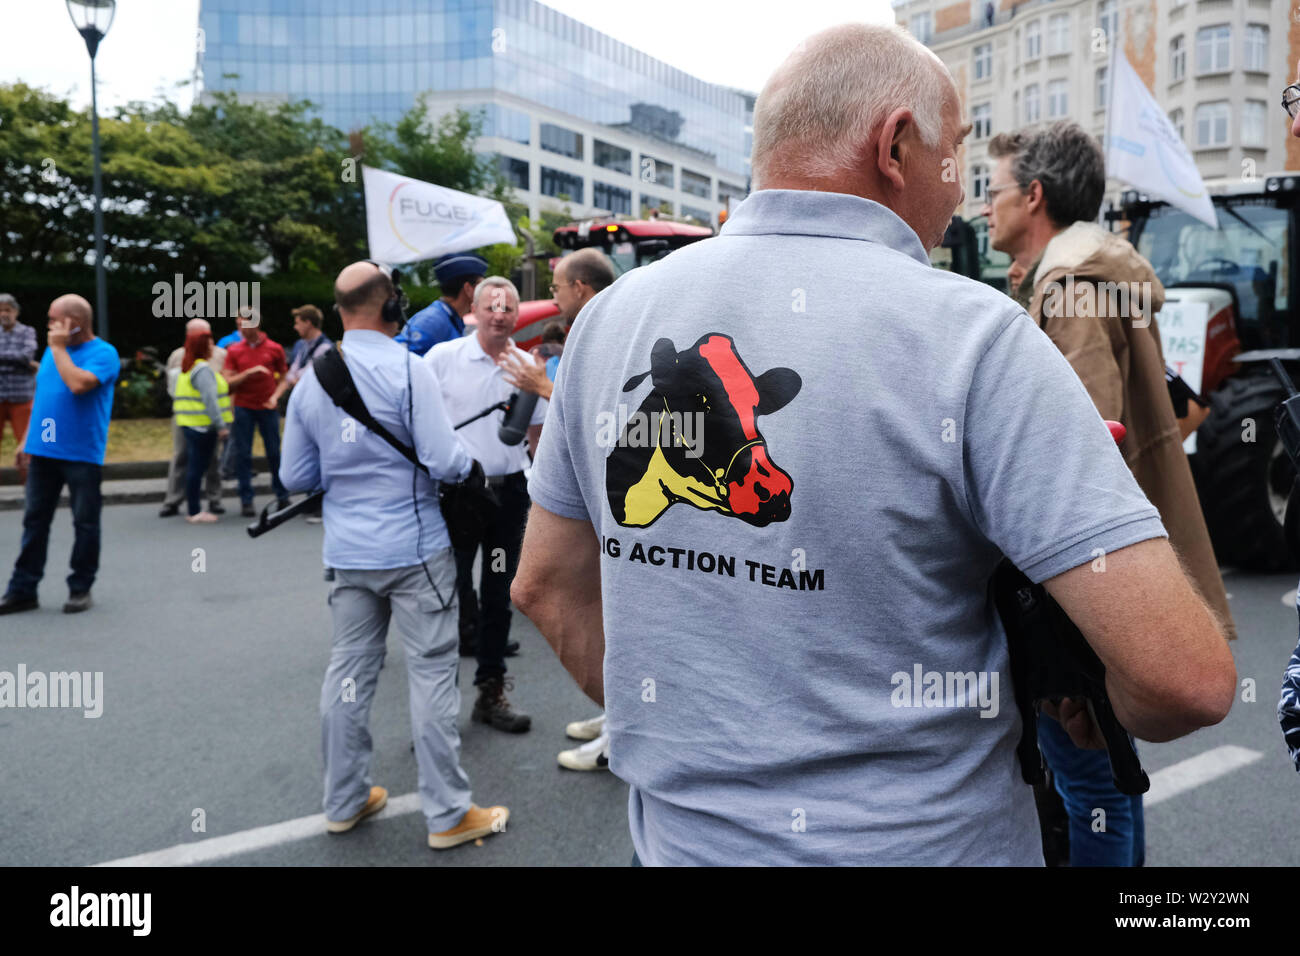 Brussels, Belgium. 11th July 2019. Tractors are seen outside of EU Commission Headquarters as farmers  take part in a protest against the EU's Mercosur trade deal. Credit: ALEXANDROS MICHAILIDIS/Alamy Live News Stock Photo